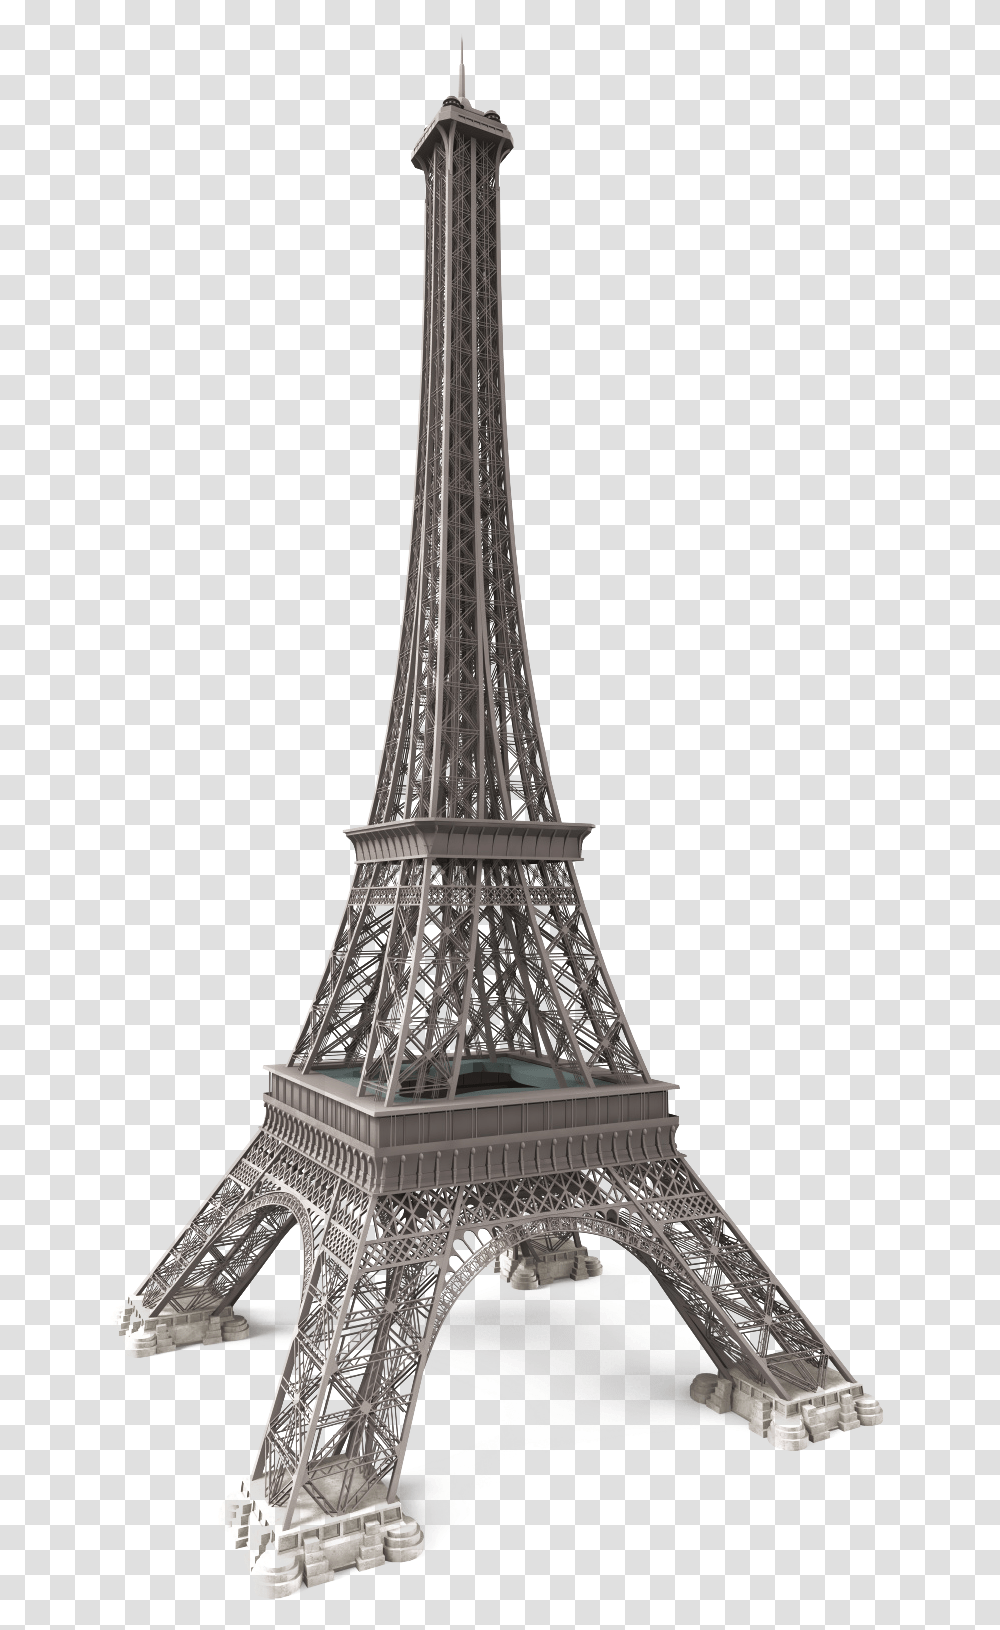 Eiffel Tower 3d Computer Graphics 3d Modeling 3d Printing, Architecture, Building, Spire, Steeple Transparent Png